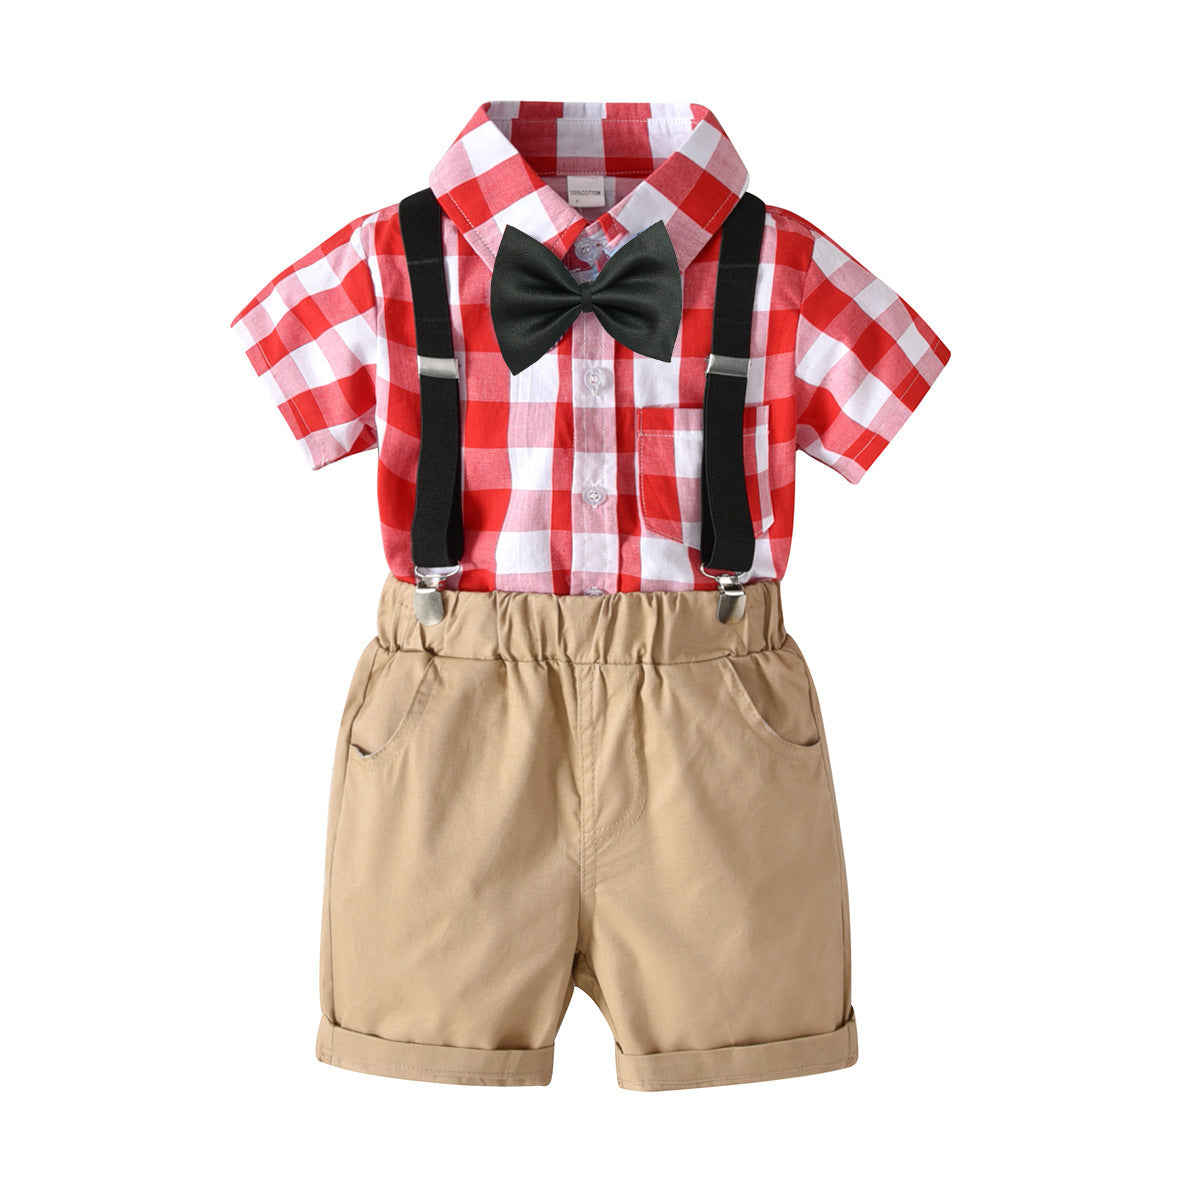 Baby Boy Gentleman Bow Tie Red Plaid Overall Shorts 3Pcs Set